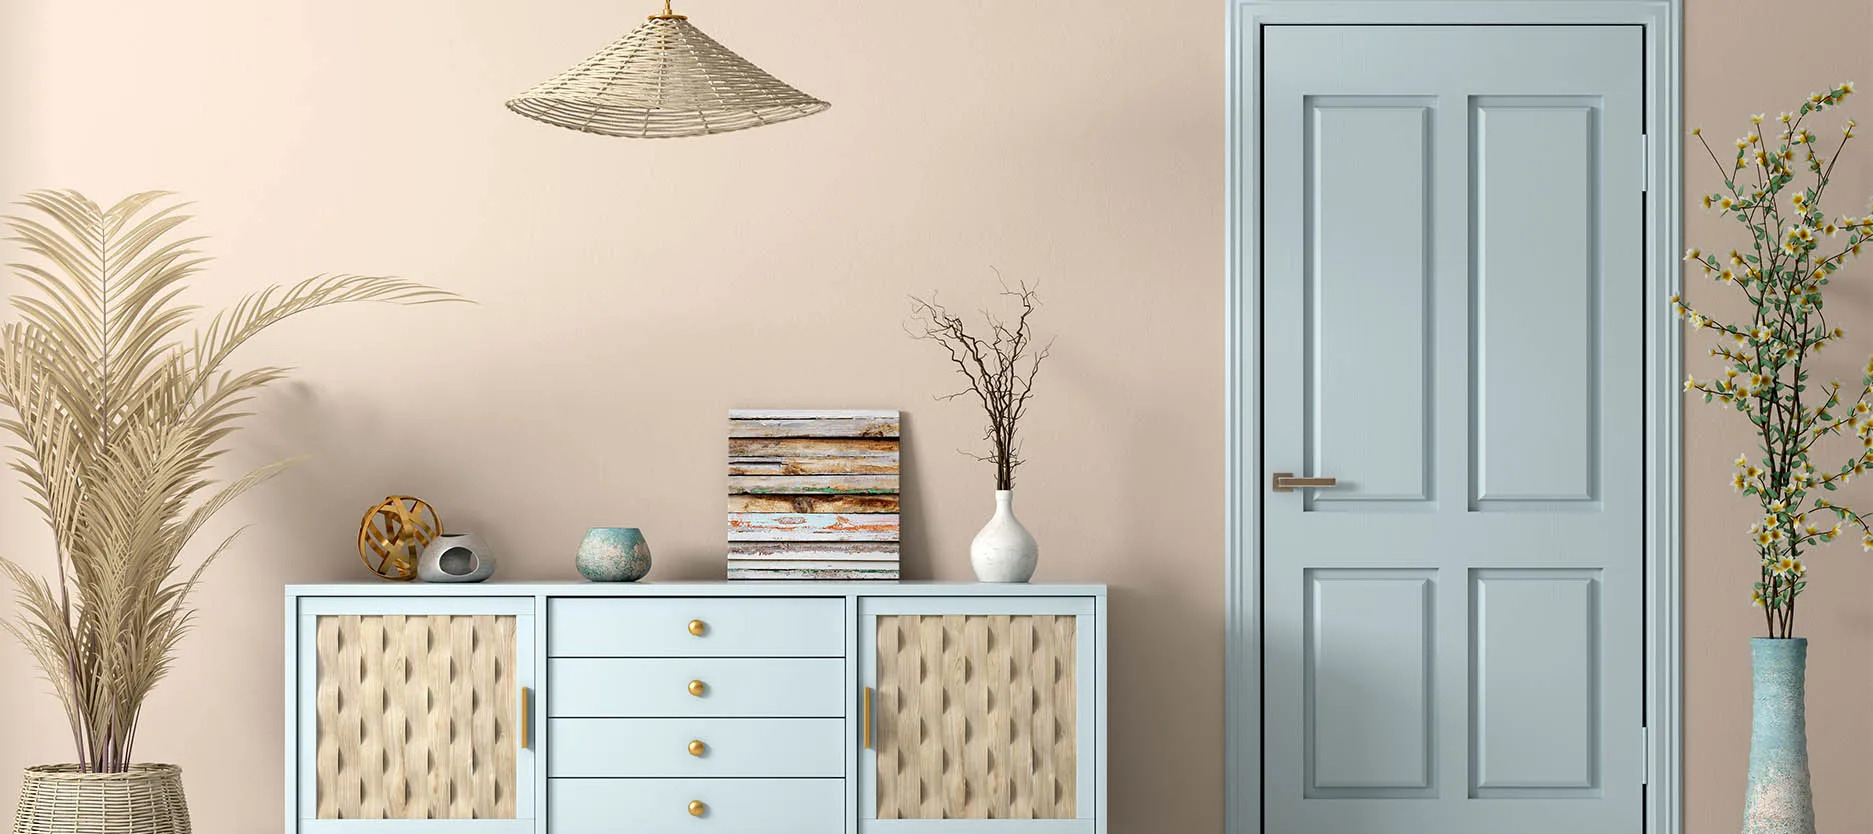 Colour combination for walls: Sky Blue and Pale Peach